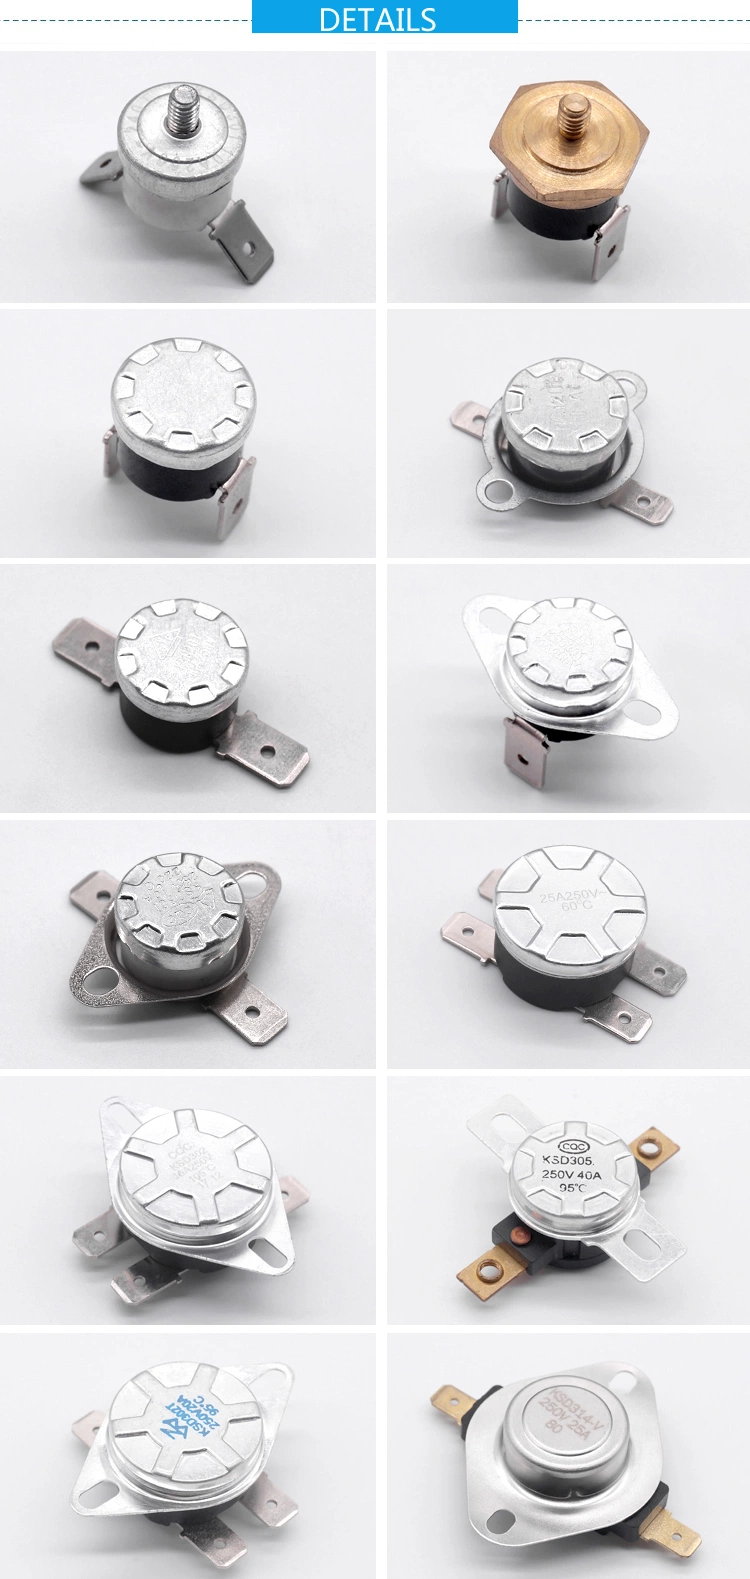 10A 15A 125V 250V Kst-207 Thermostat for Electric Iron Oven Pan